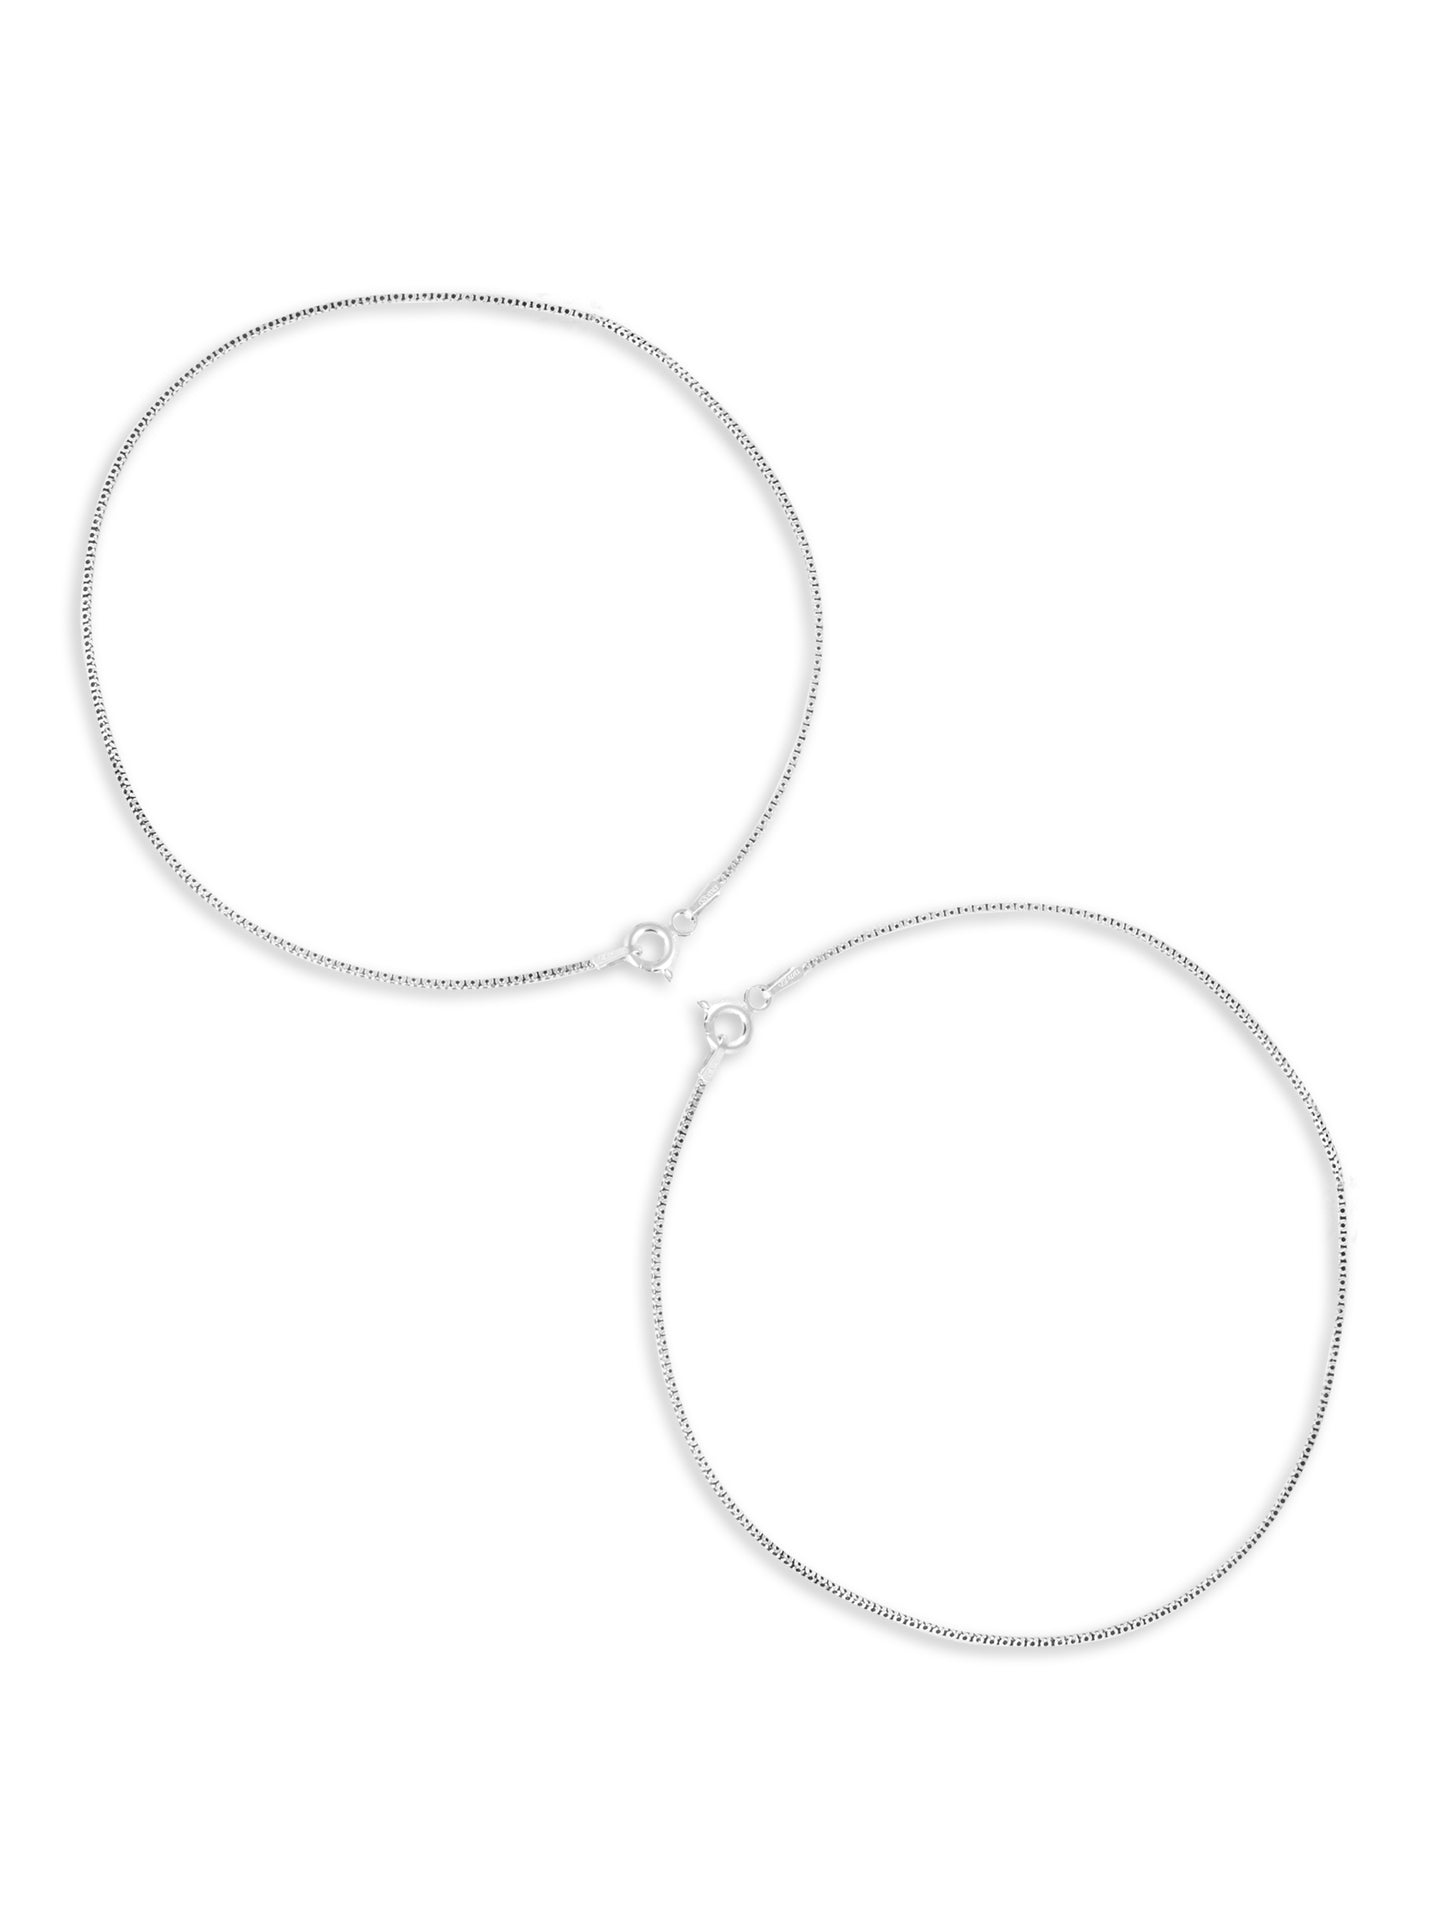 Silver Anklets white gold